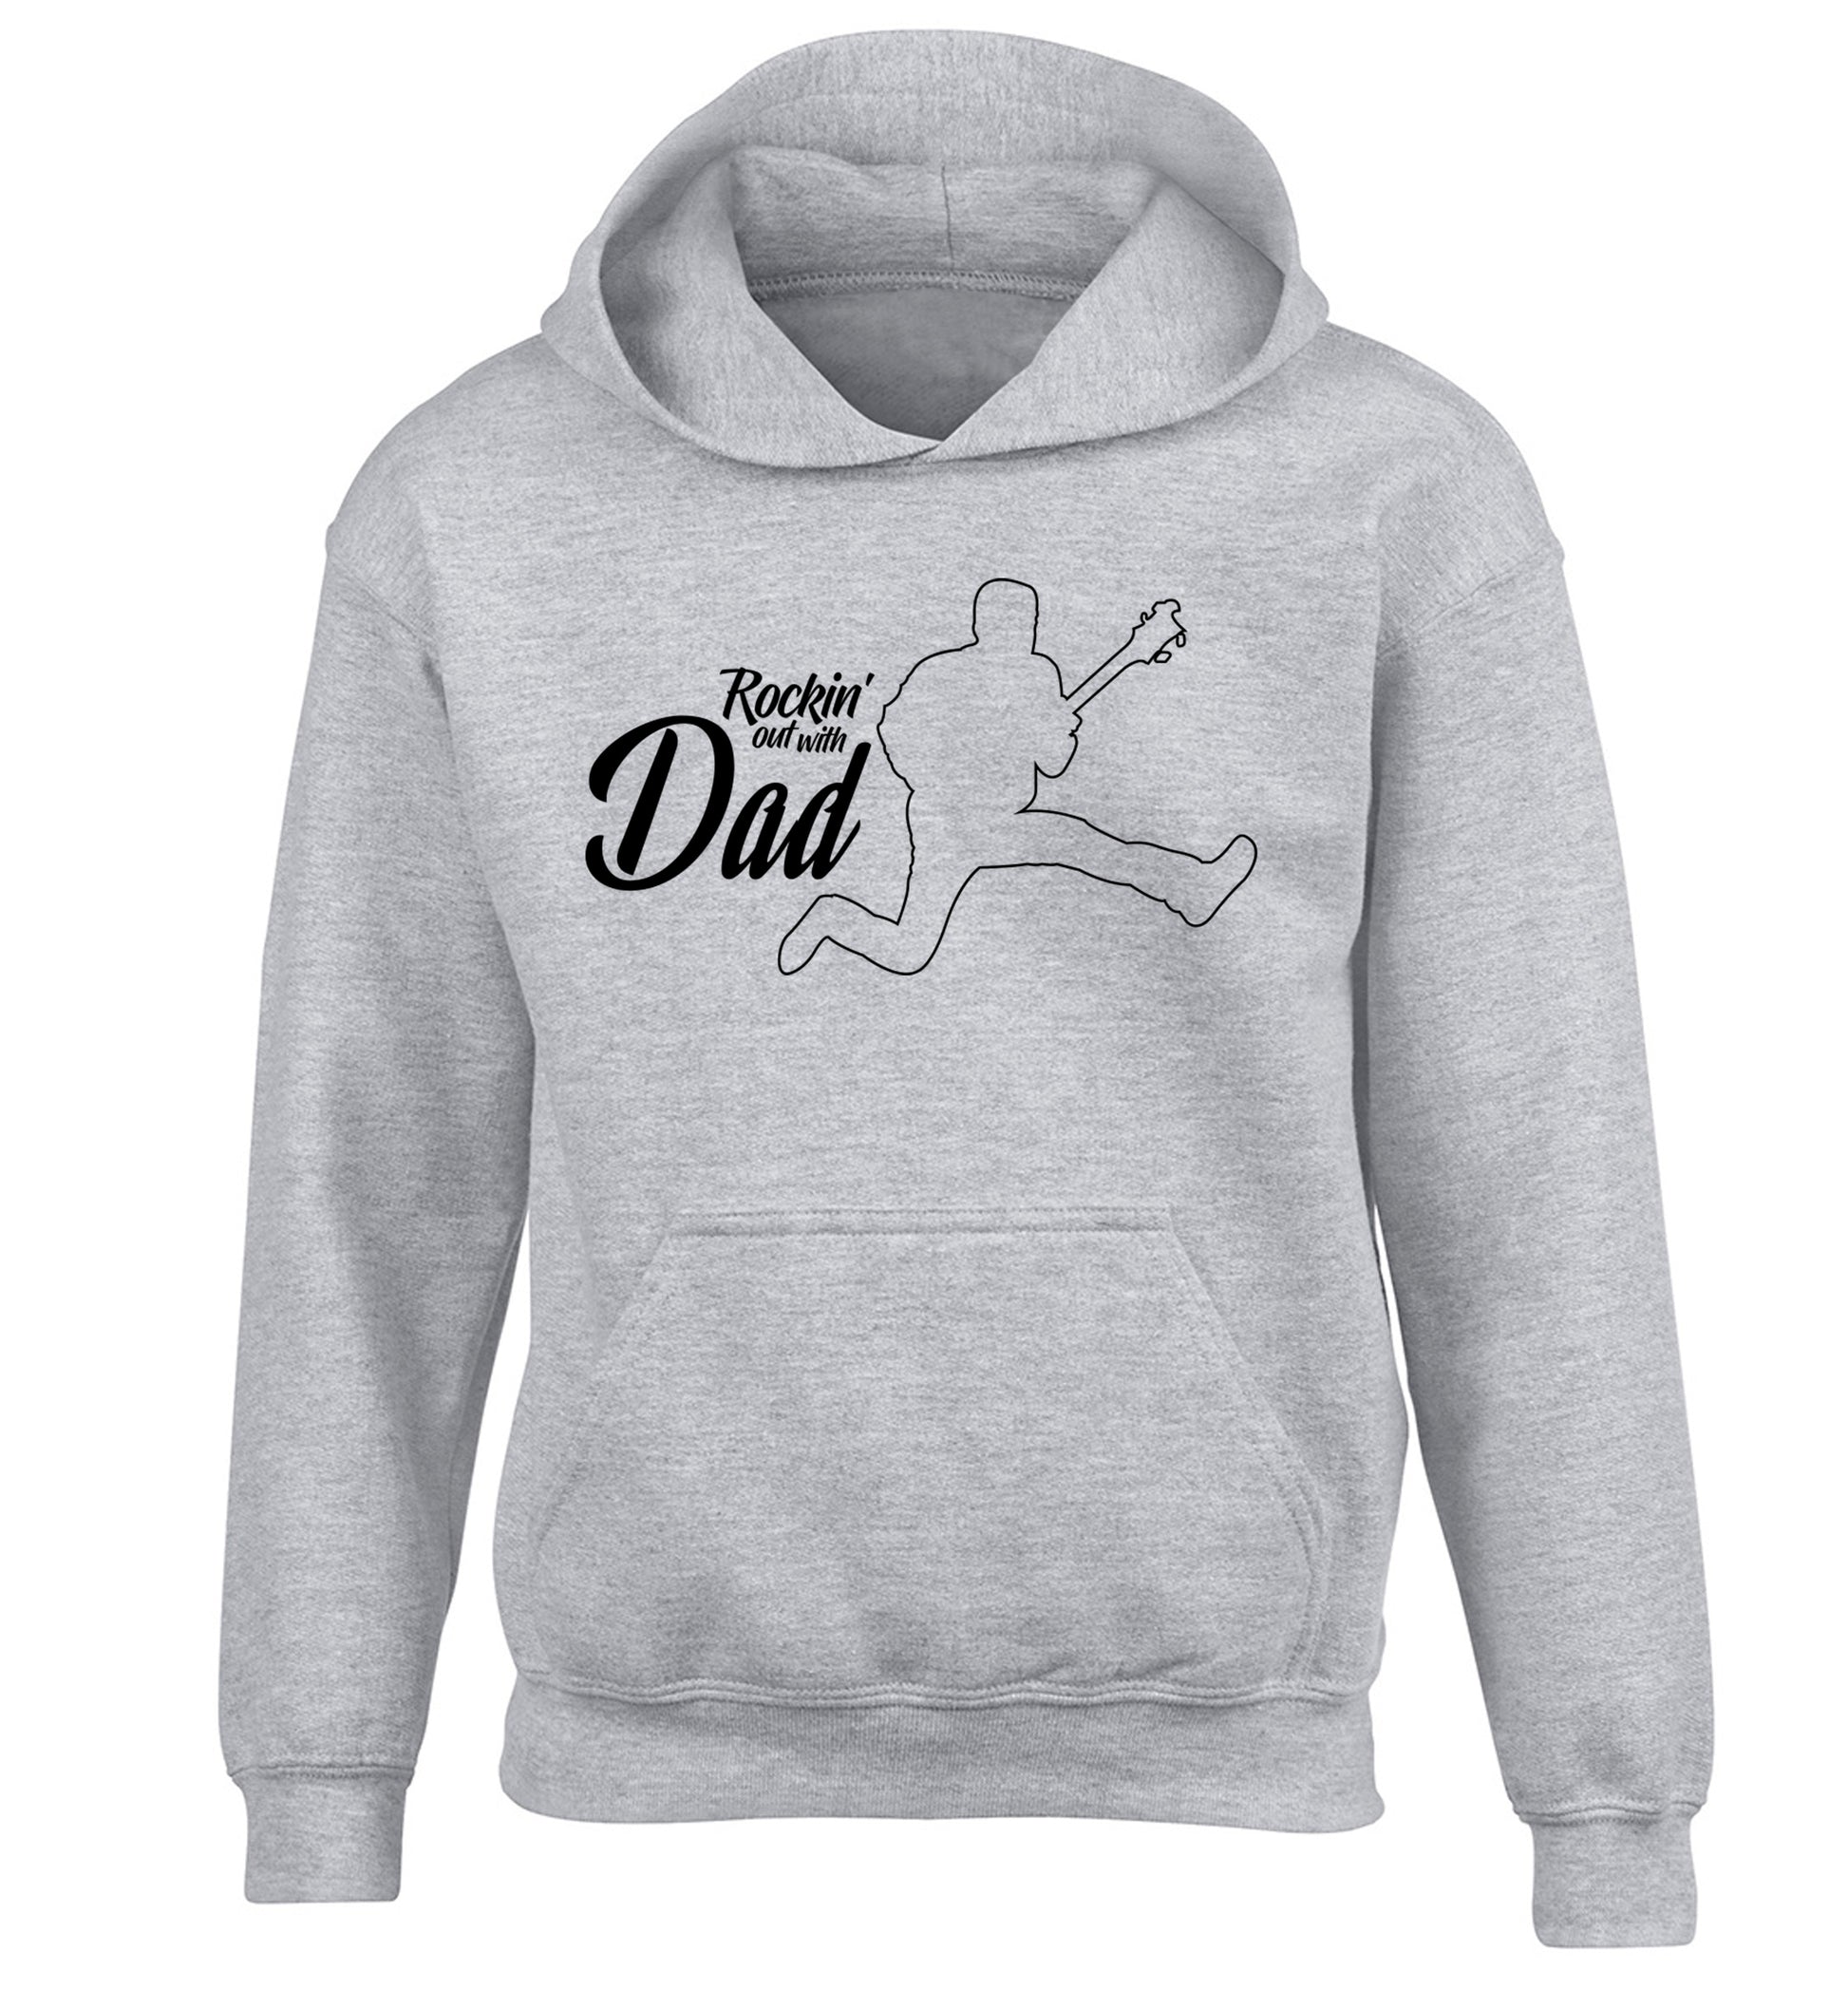 Rockin out with dad children's grey hoodie 12-13 Years